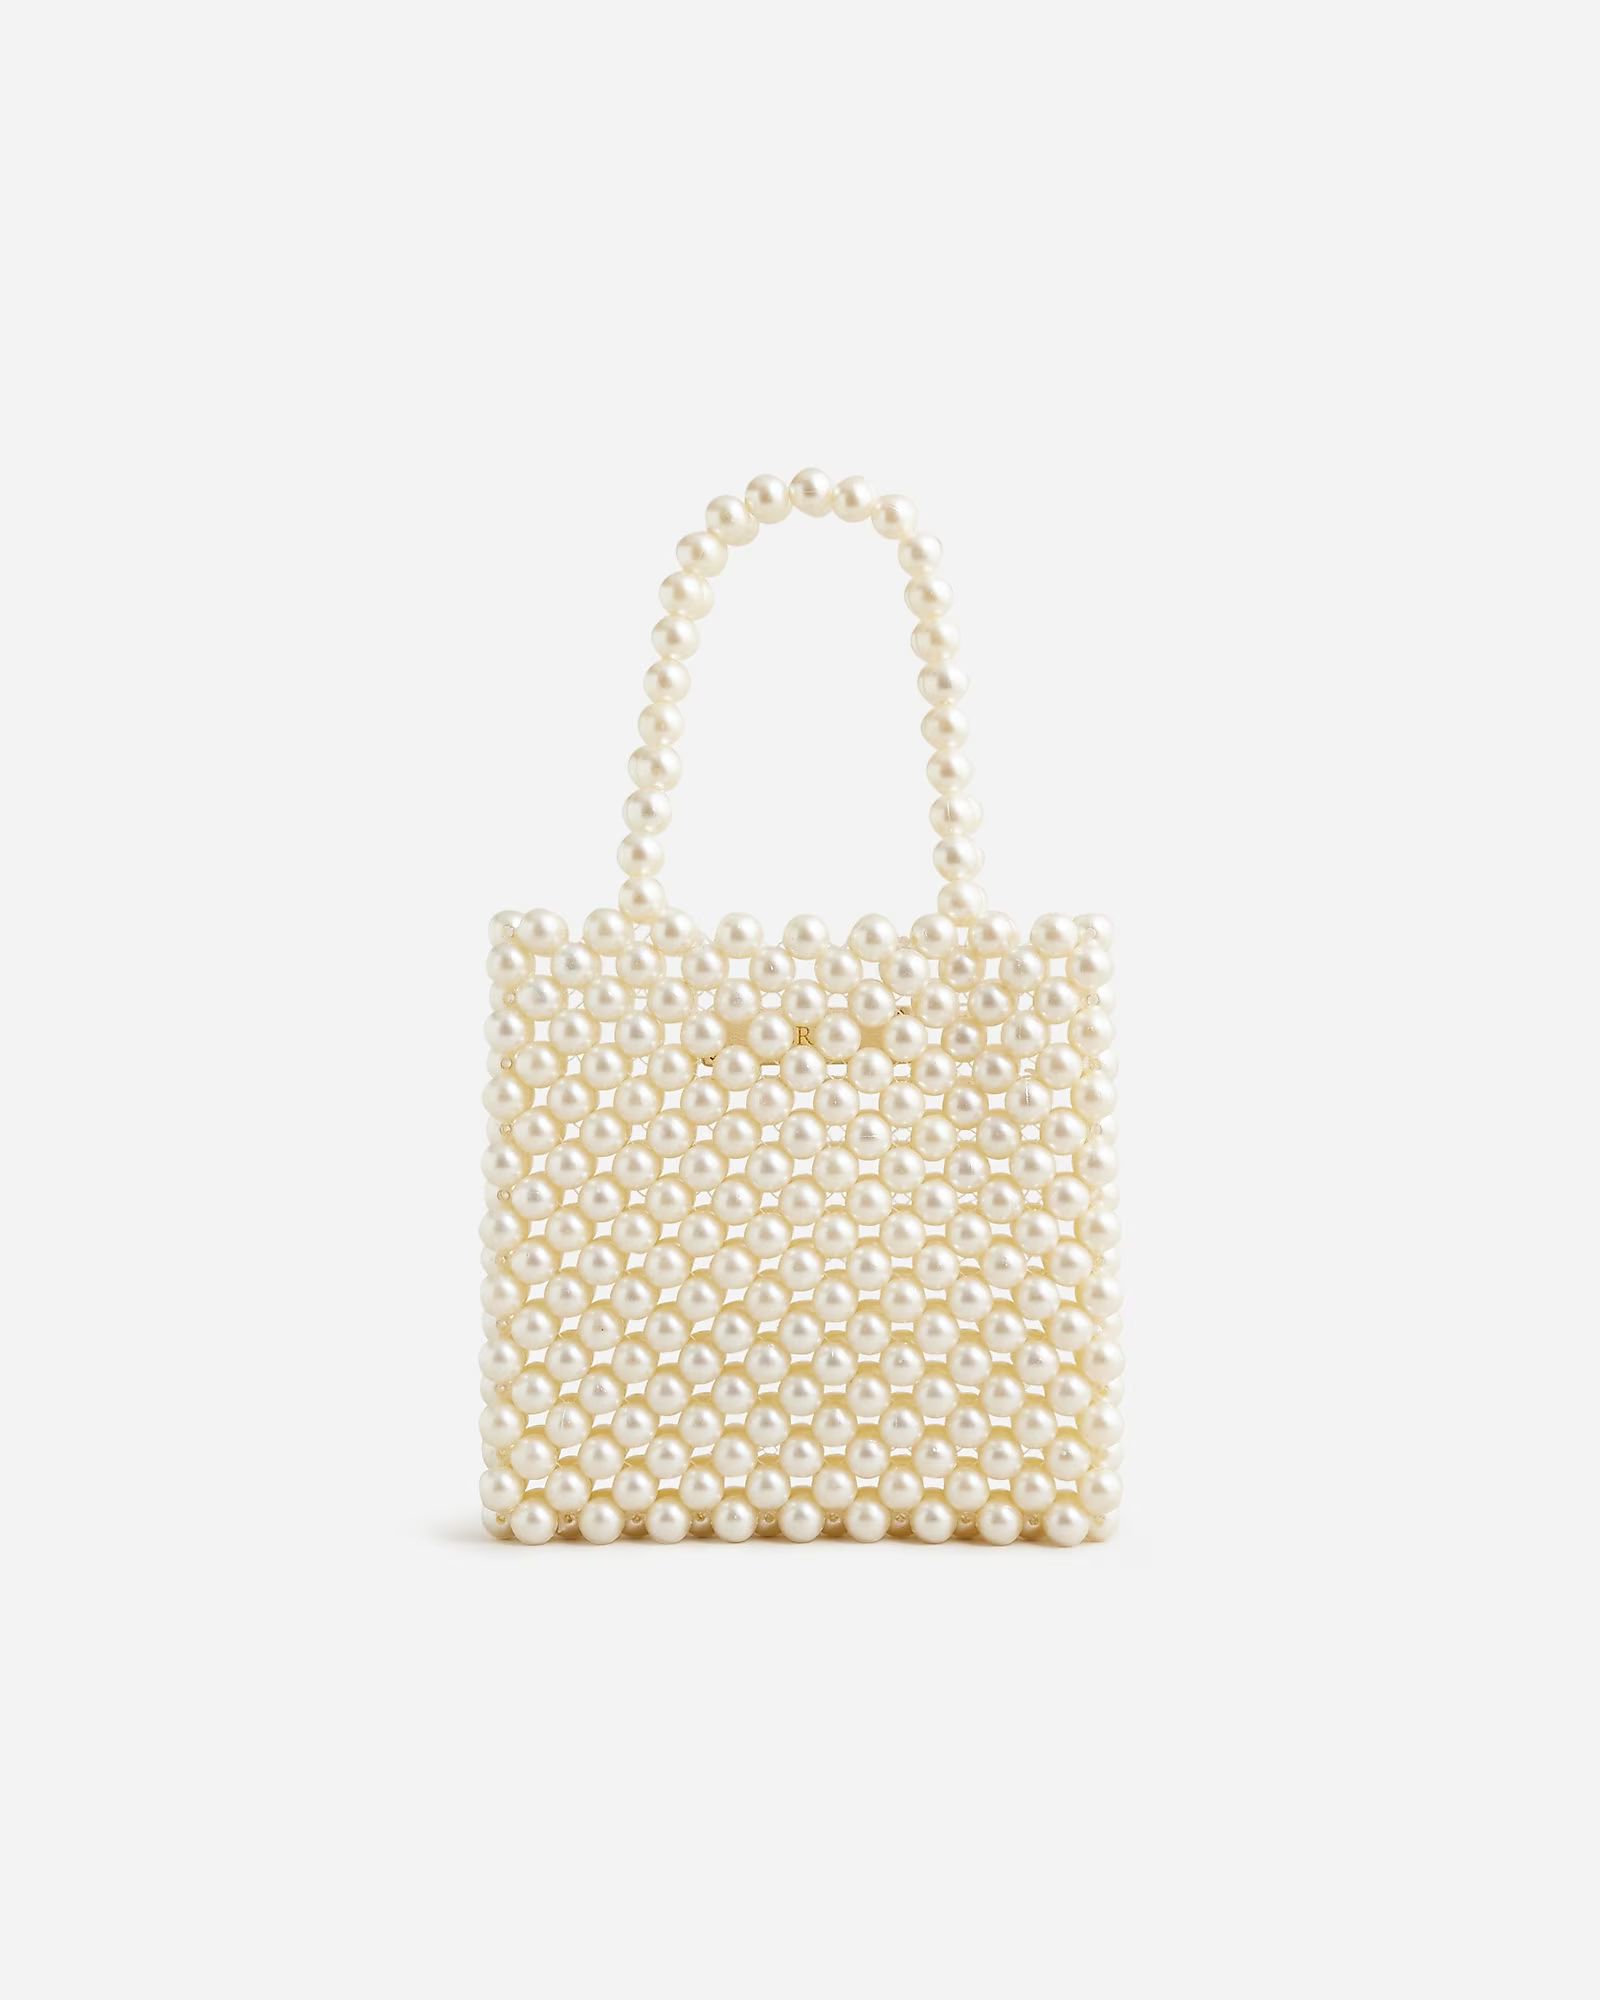 3.5(10 REVIEWS)Hand-beaded faux-pearl mini bag$98.0030% off full price with code SHOP30Olive/Mult... | J.Crew US